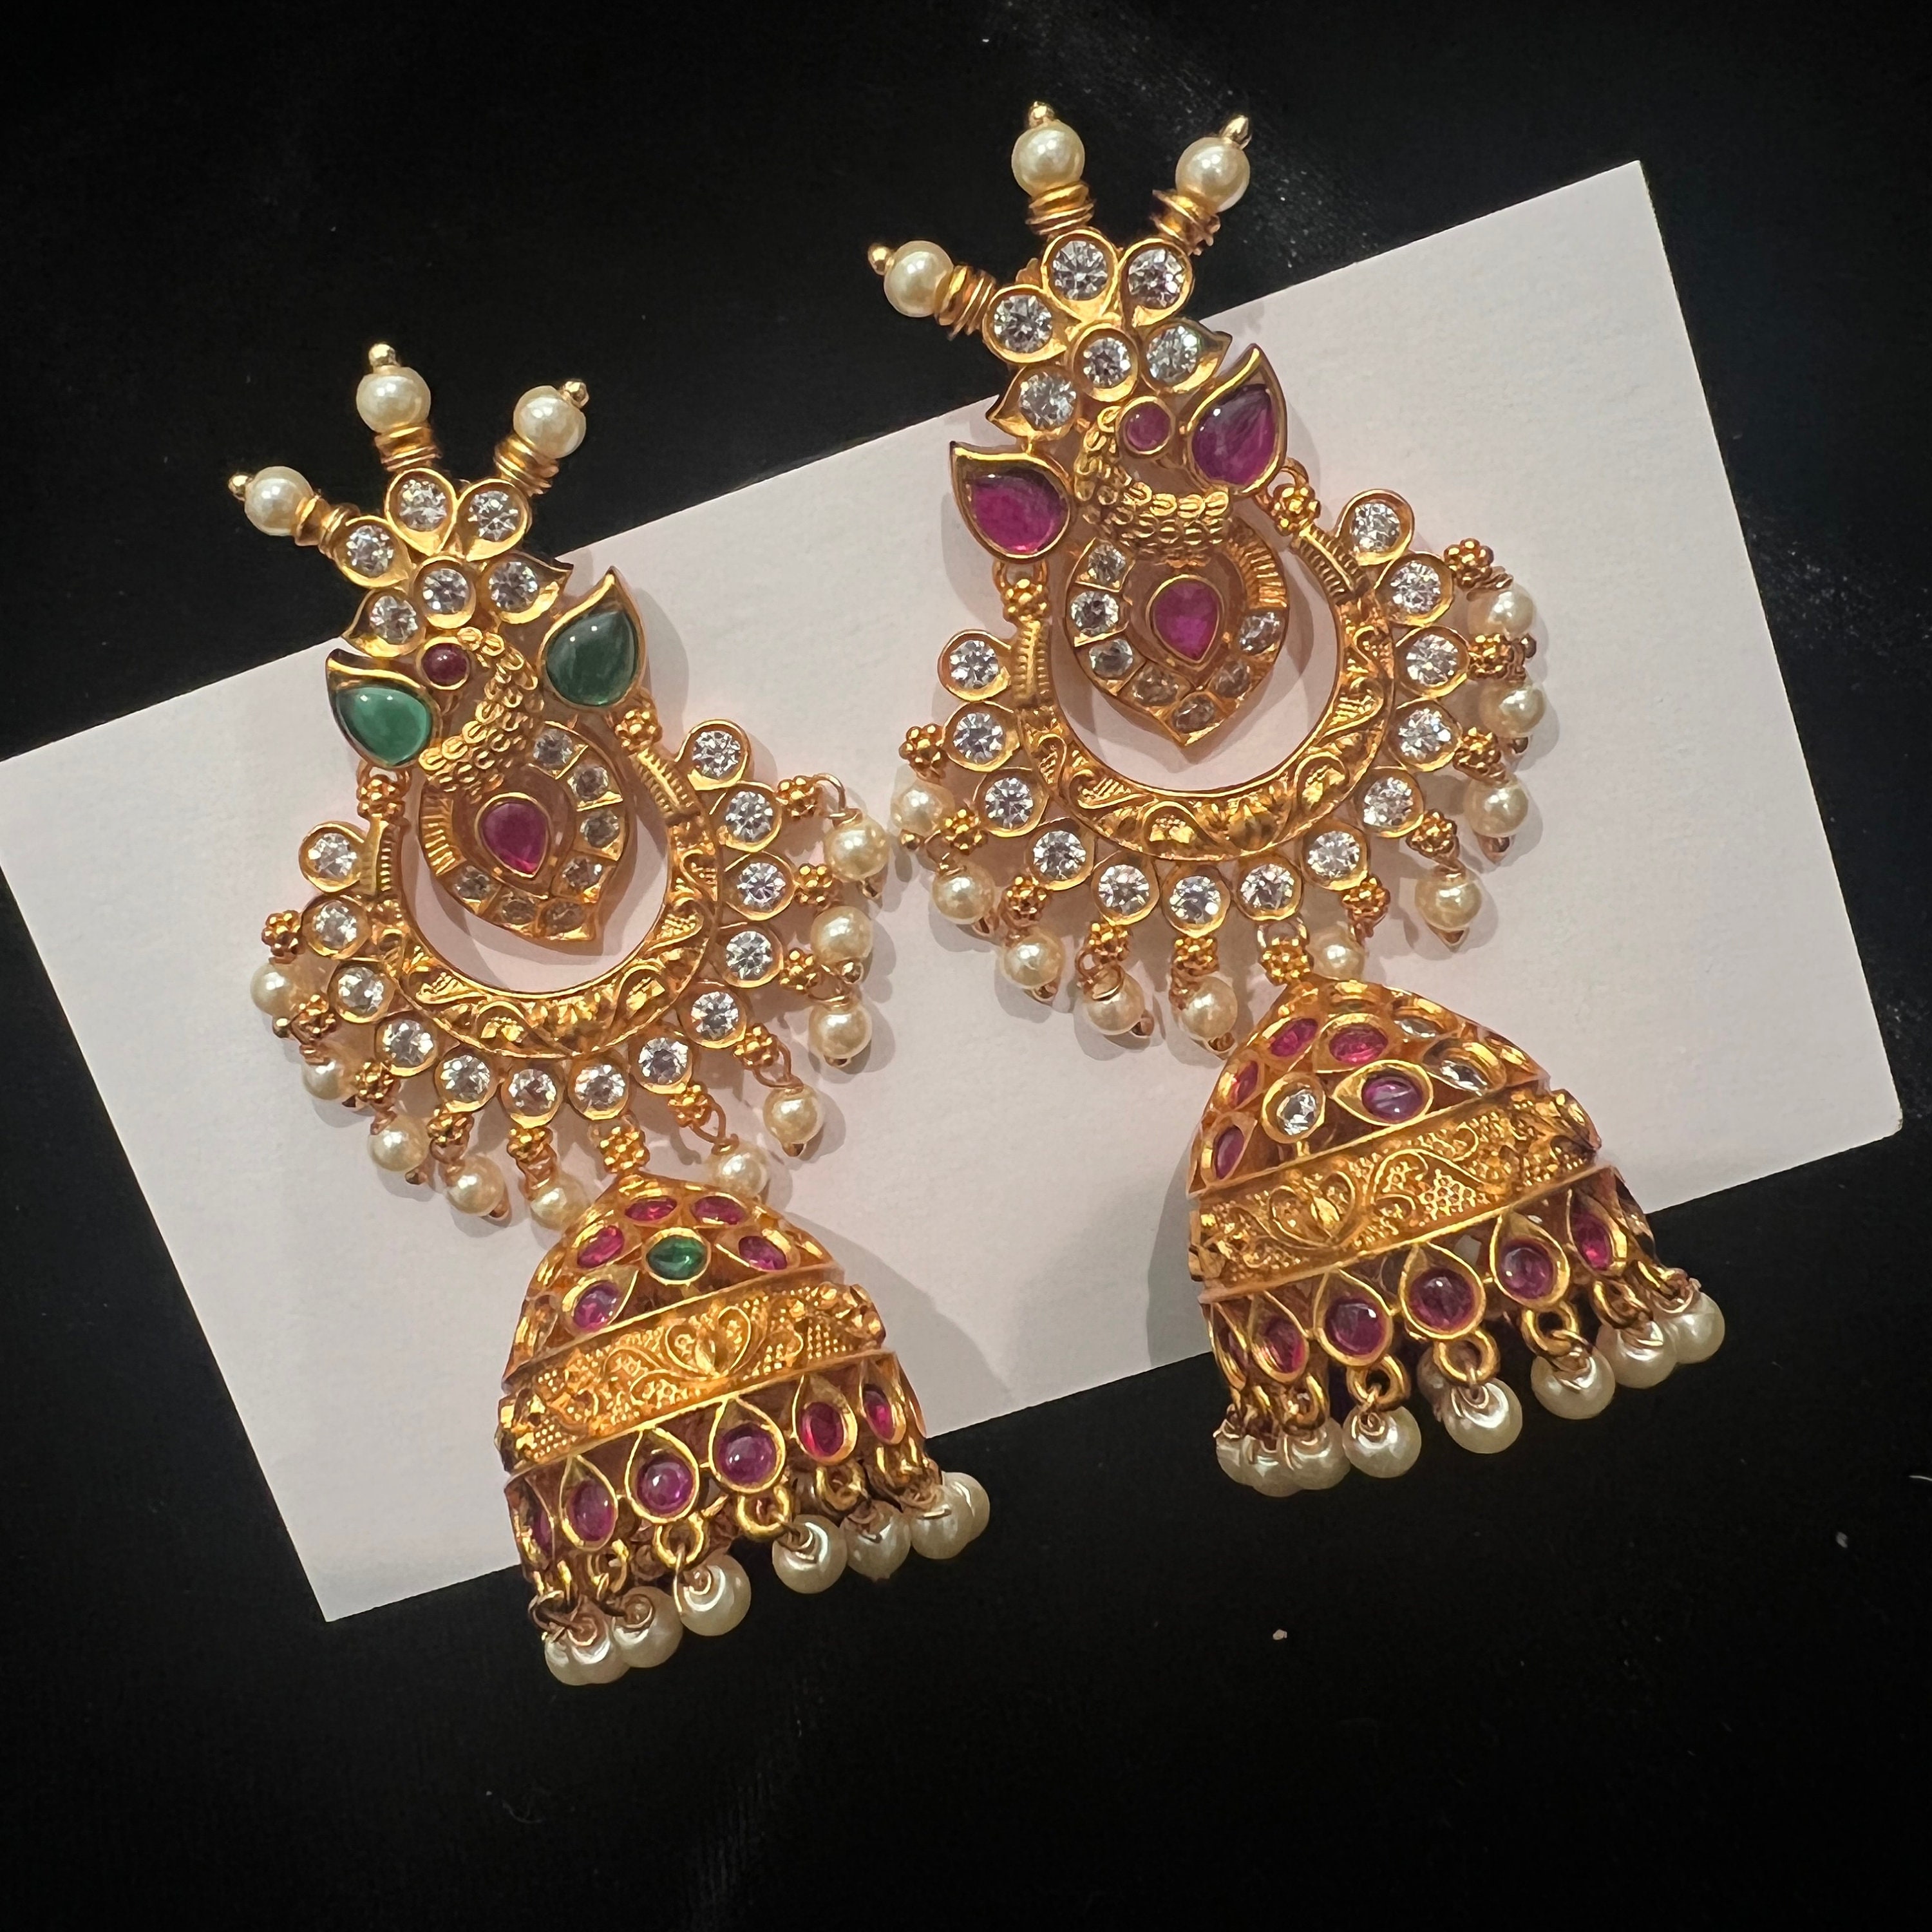 Latest gold buttalu earring designs with weight and price |gold earrings  with weight and price - YouTube